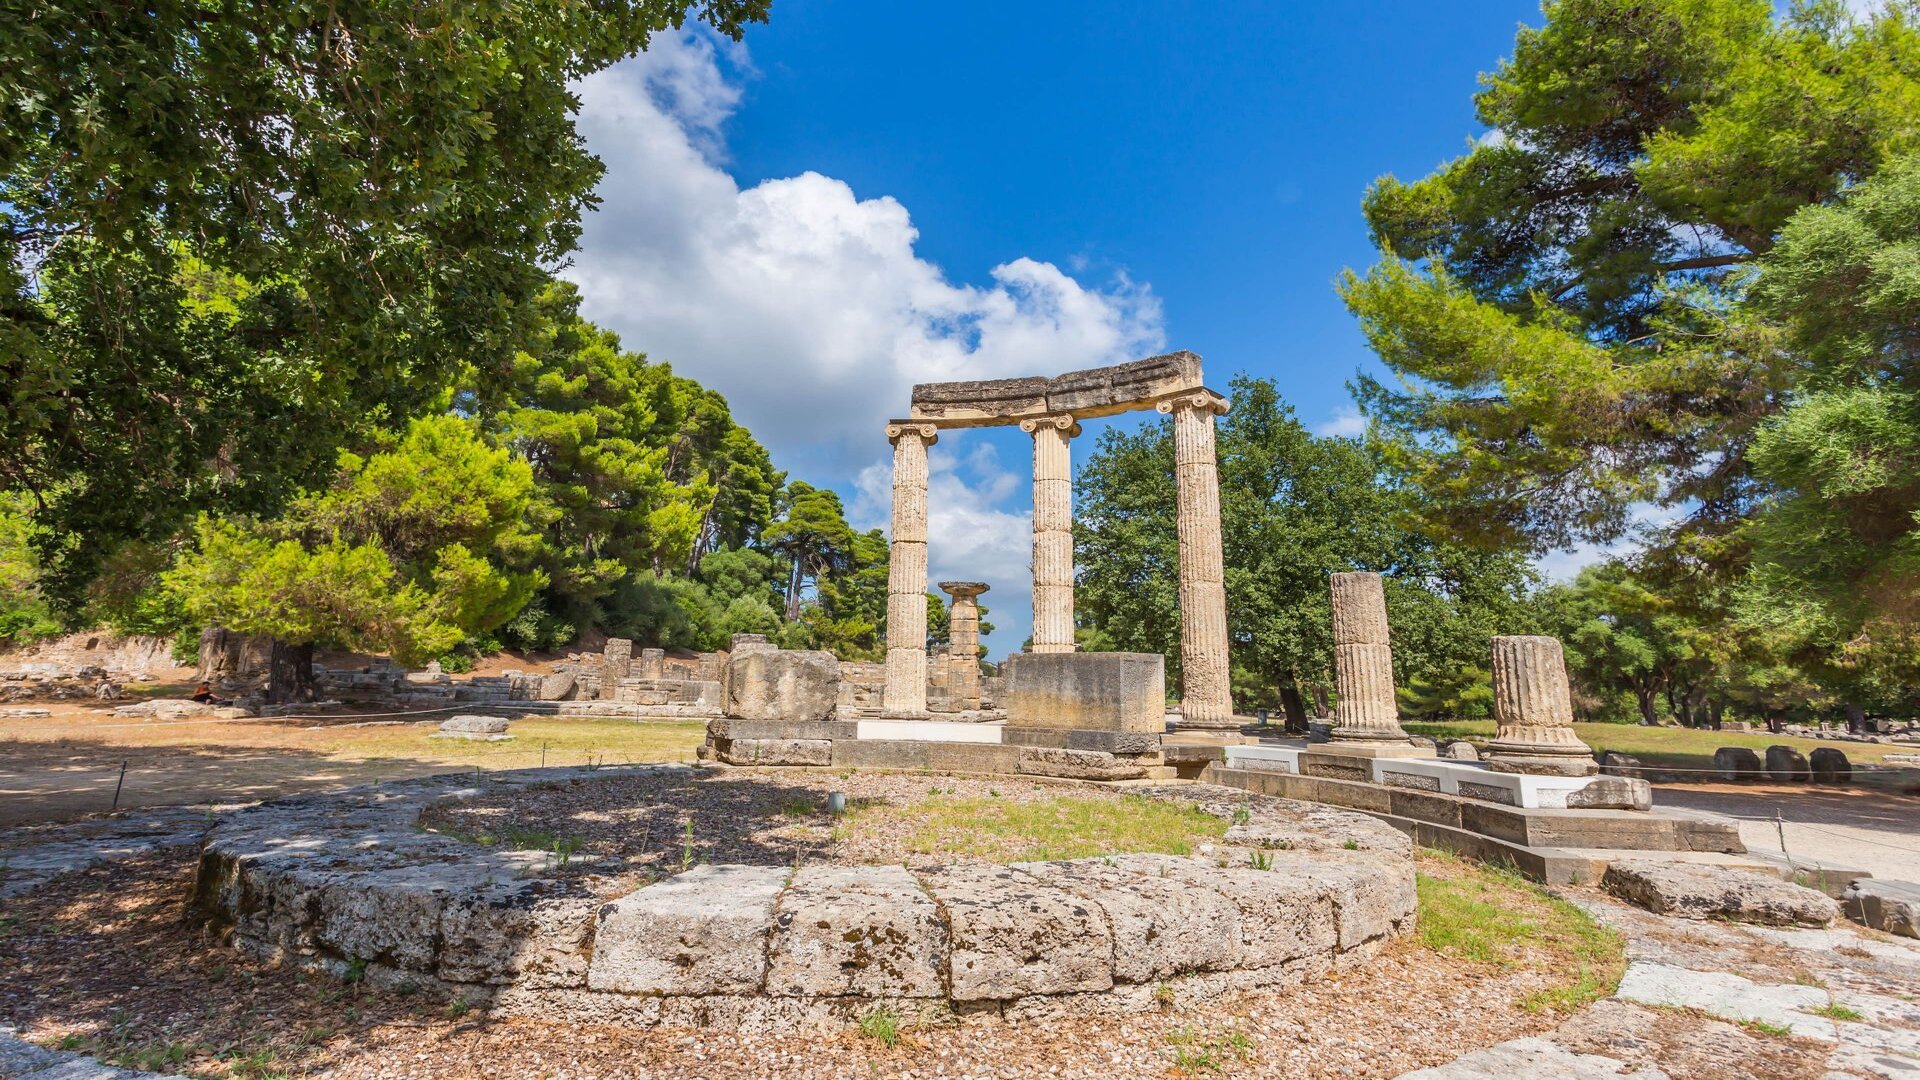 Greek government collaborates with Microsoft to digitally preserve Ancient Olympia